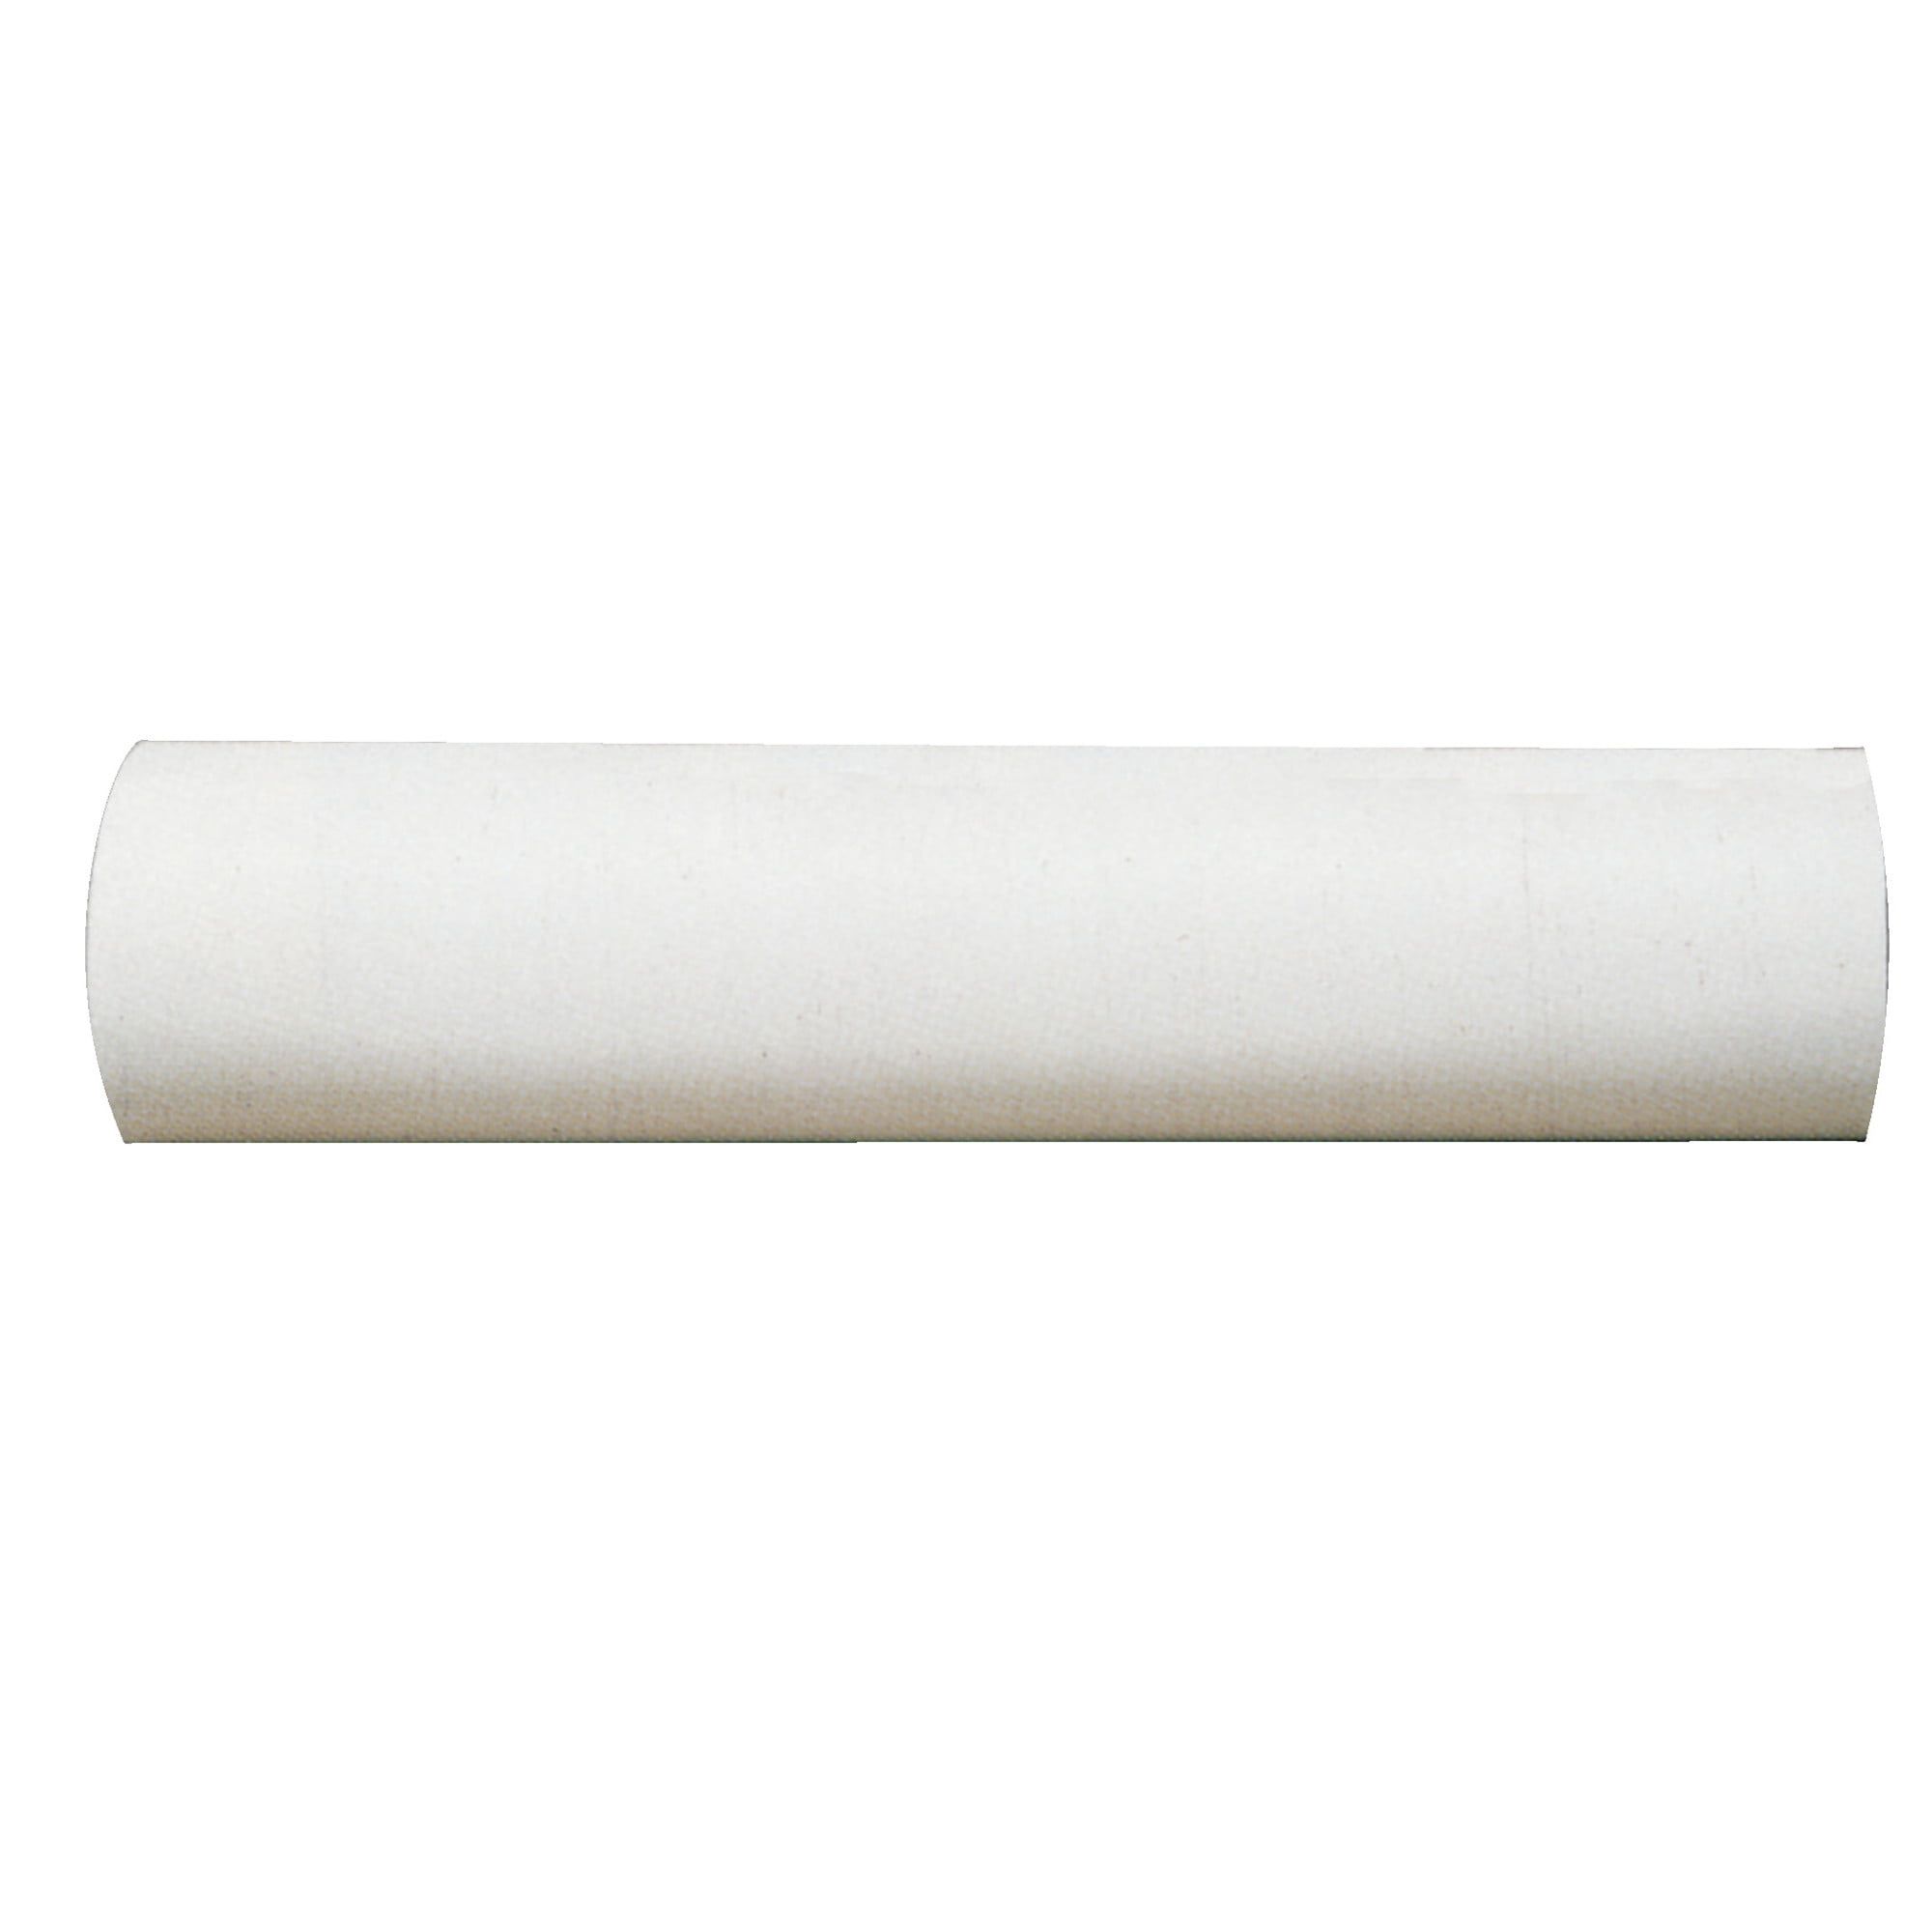 Etereauty 1Pcs Drawing Paper Roll Poster Paper Craft Paper Roll White  Wrapping Paper(White) 